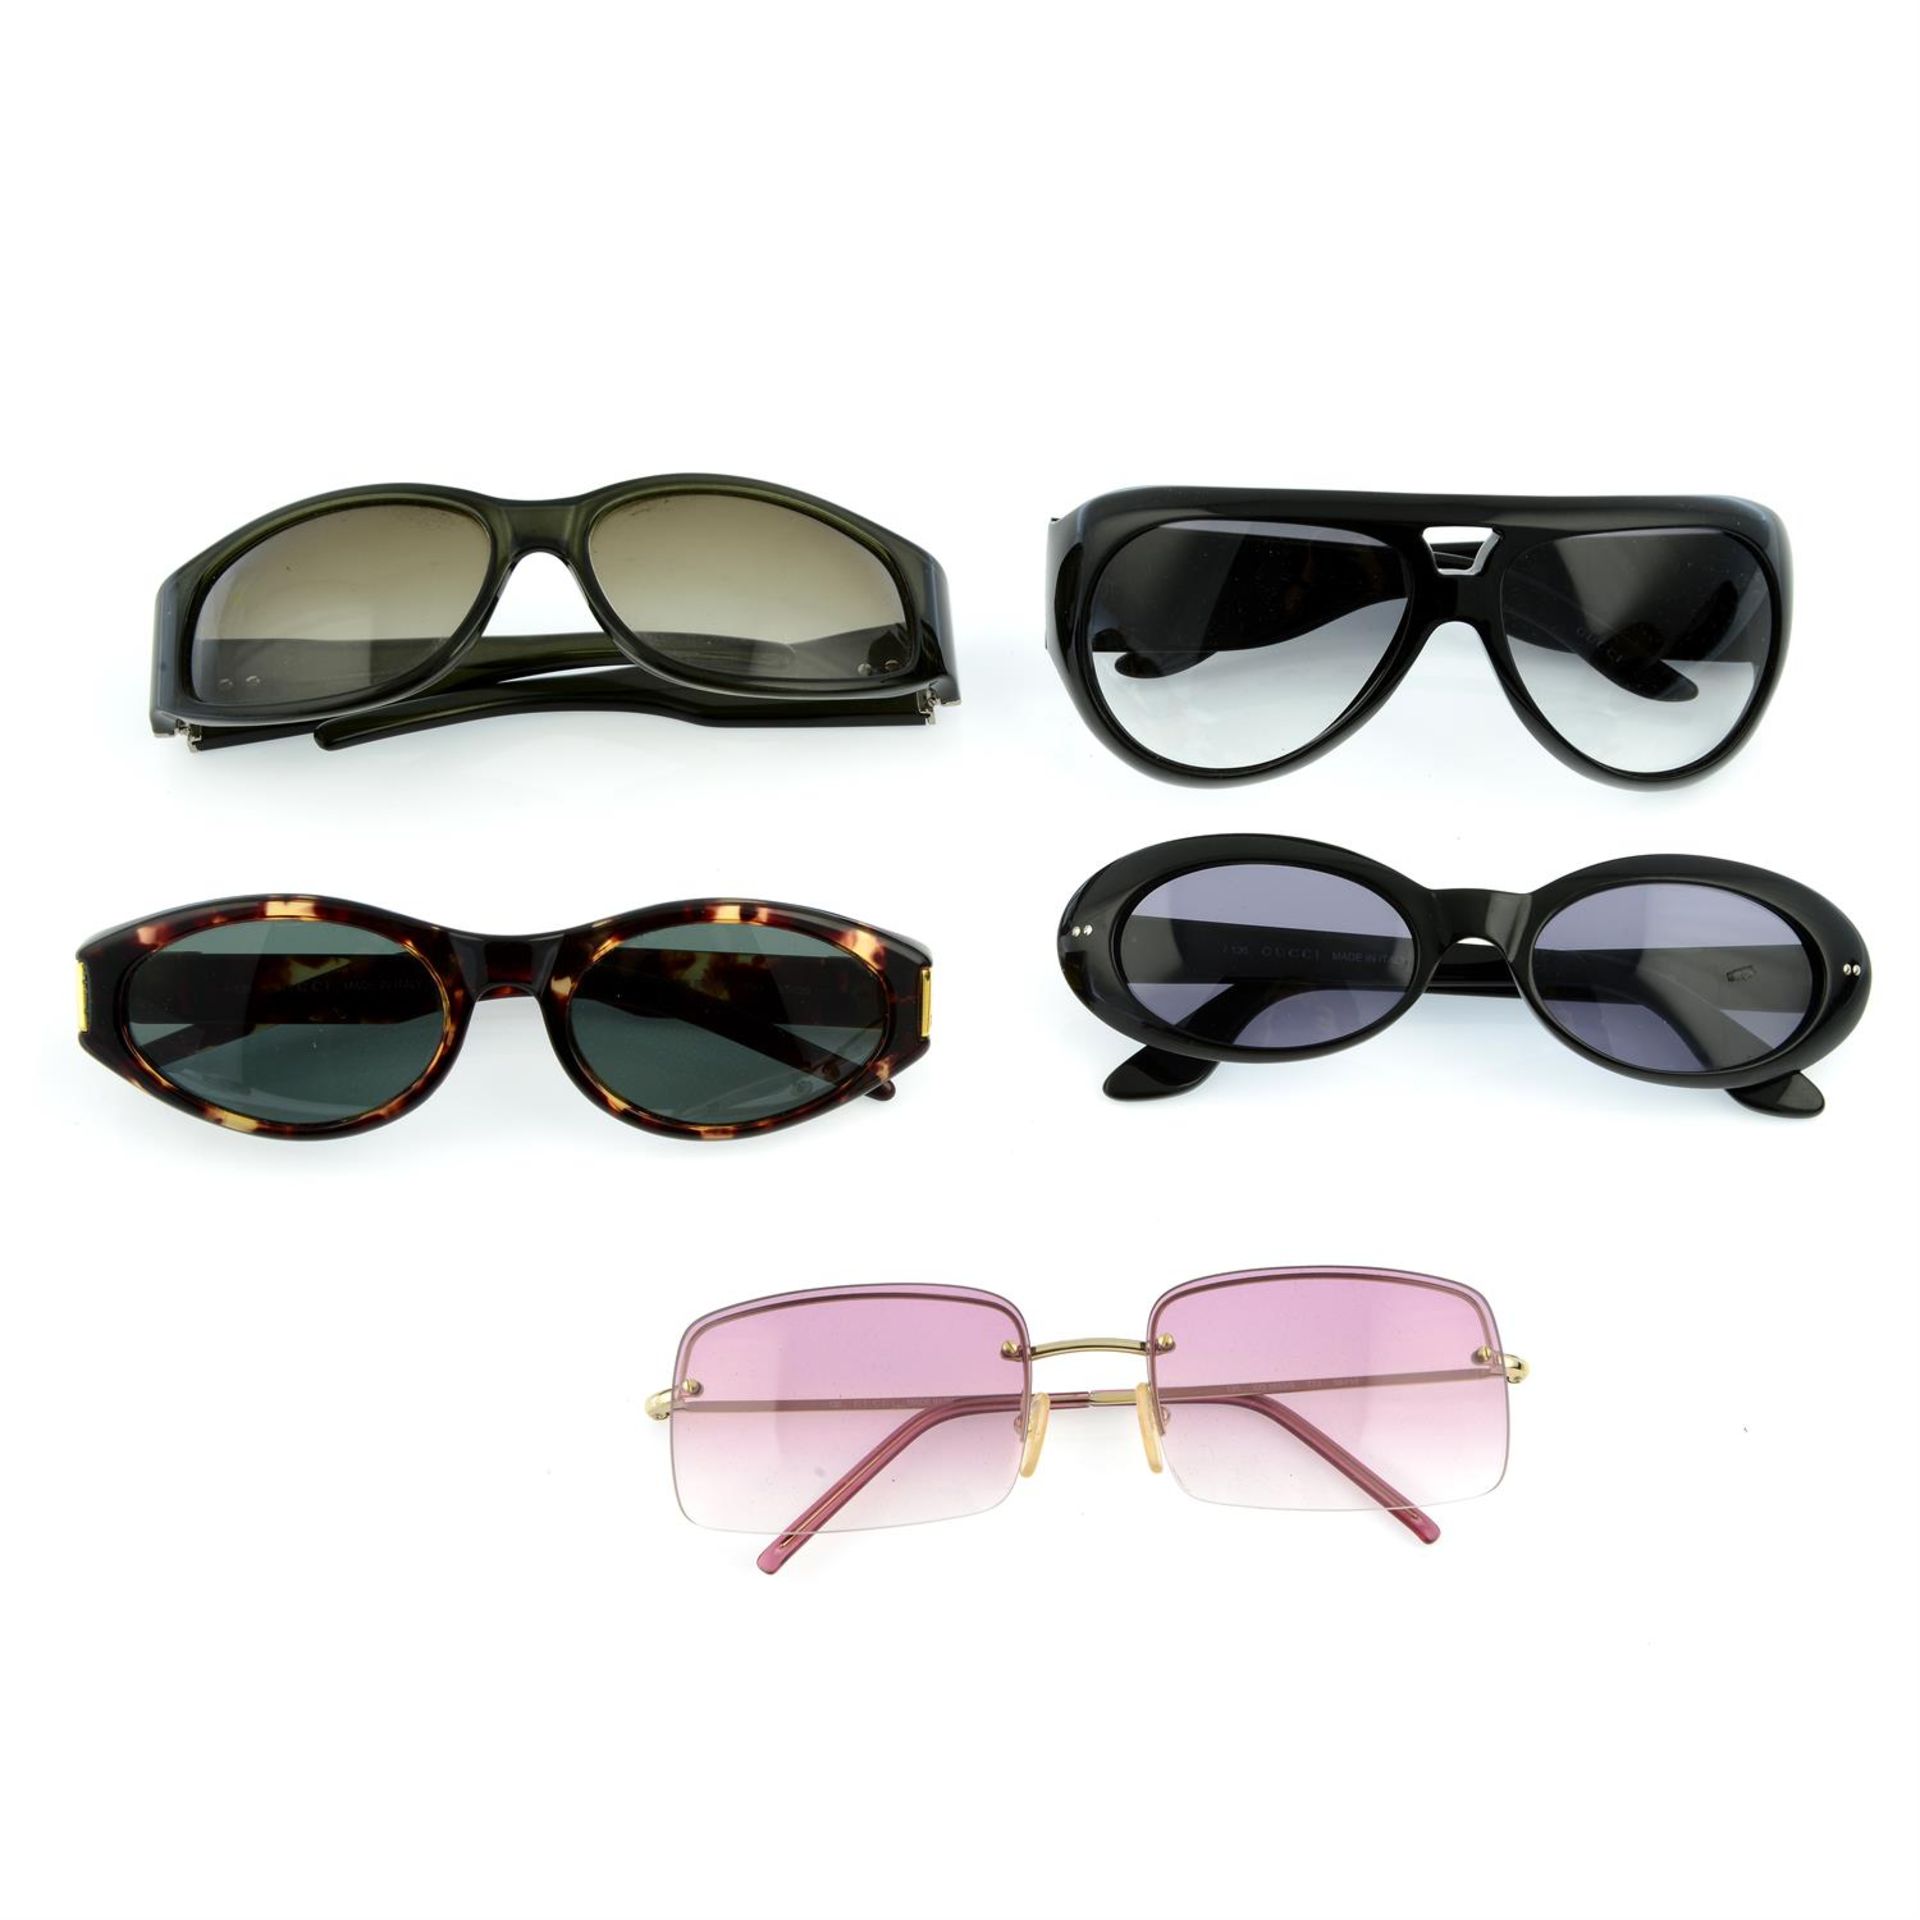 GUCCI - five pairs of sunglasses.